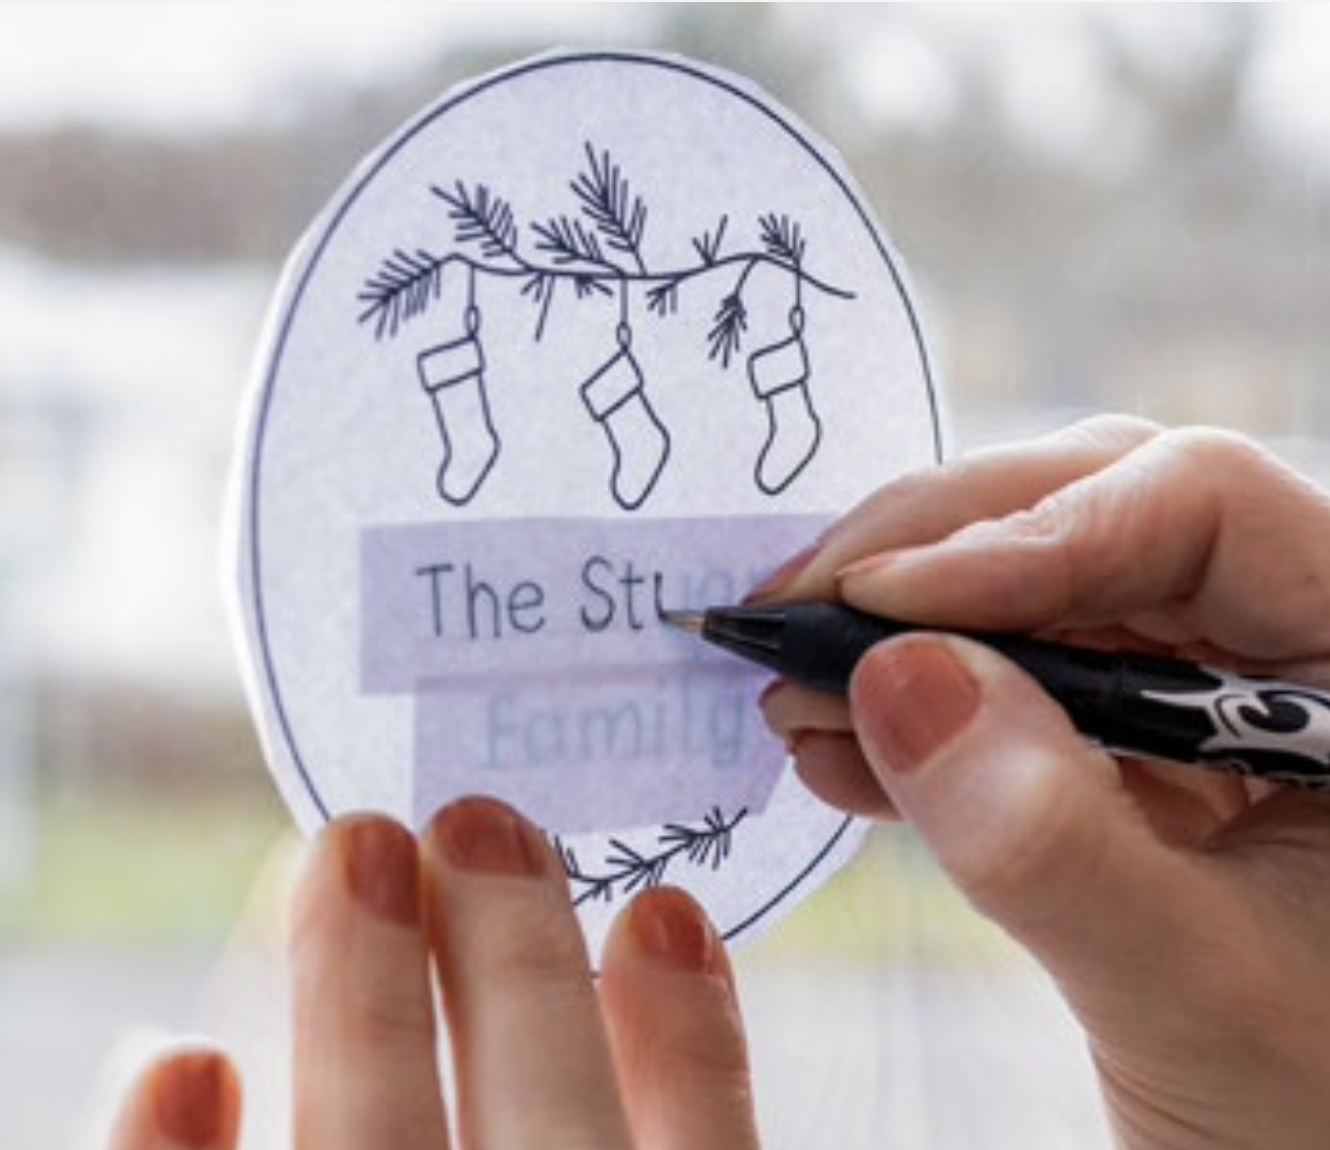 Hands draw on the words 'The Stuart Family' onto a patttern.